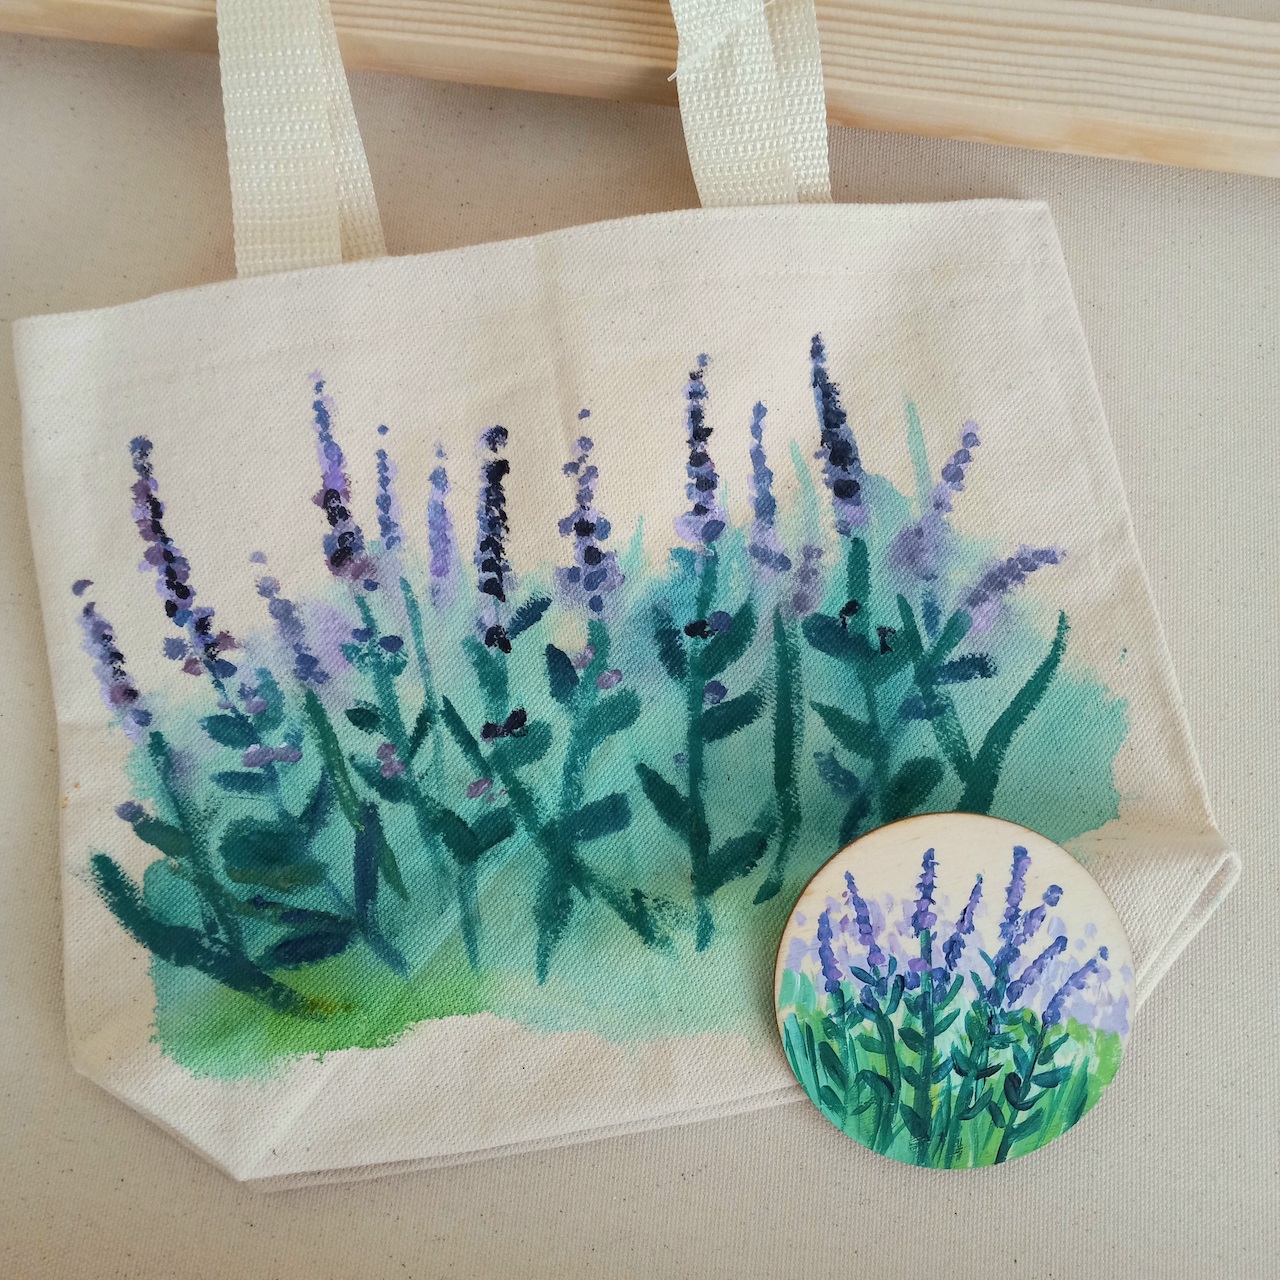 Canvas bag with lavender floral imagery painted on.